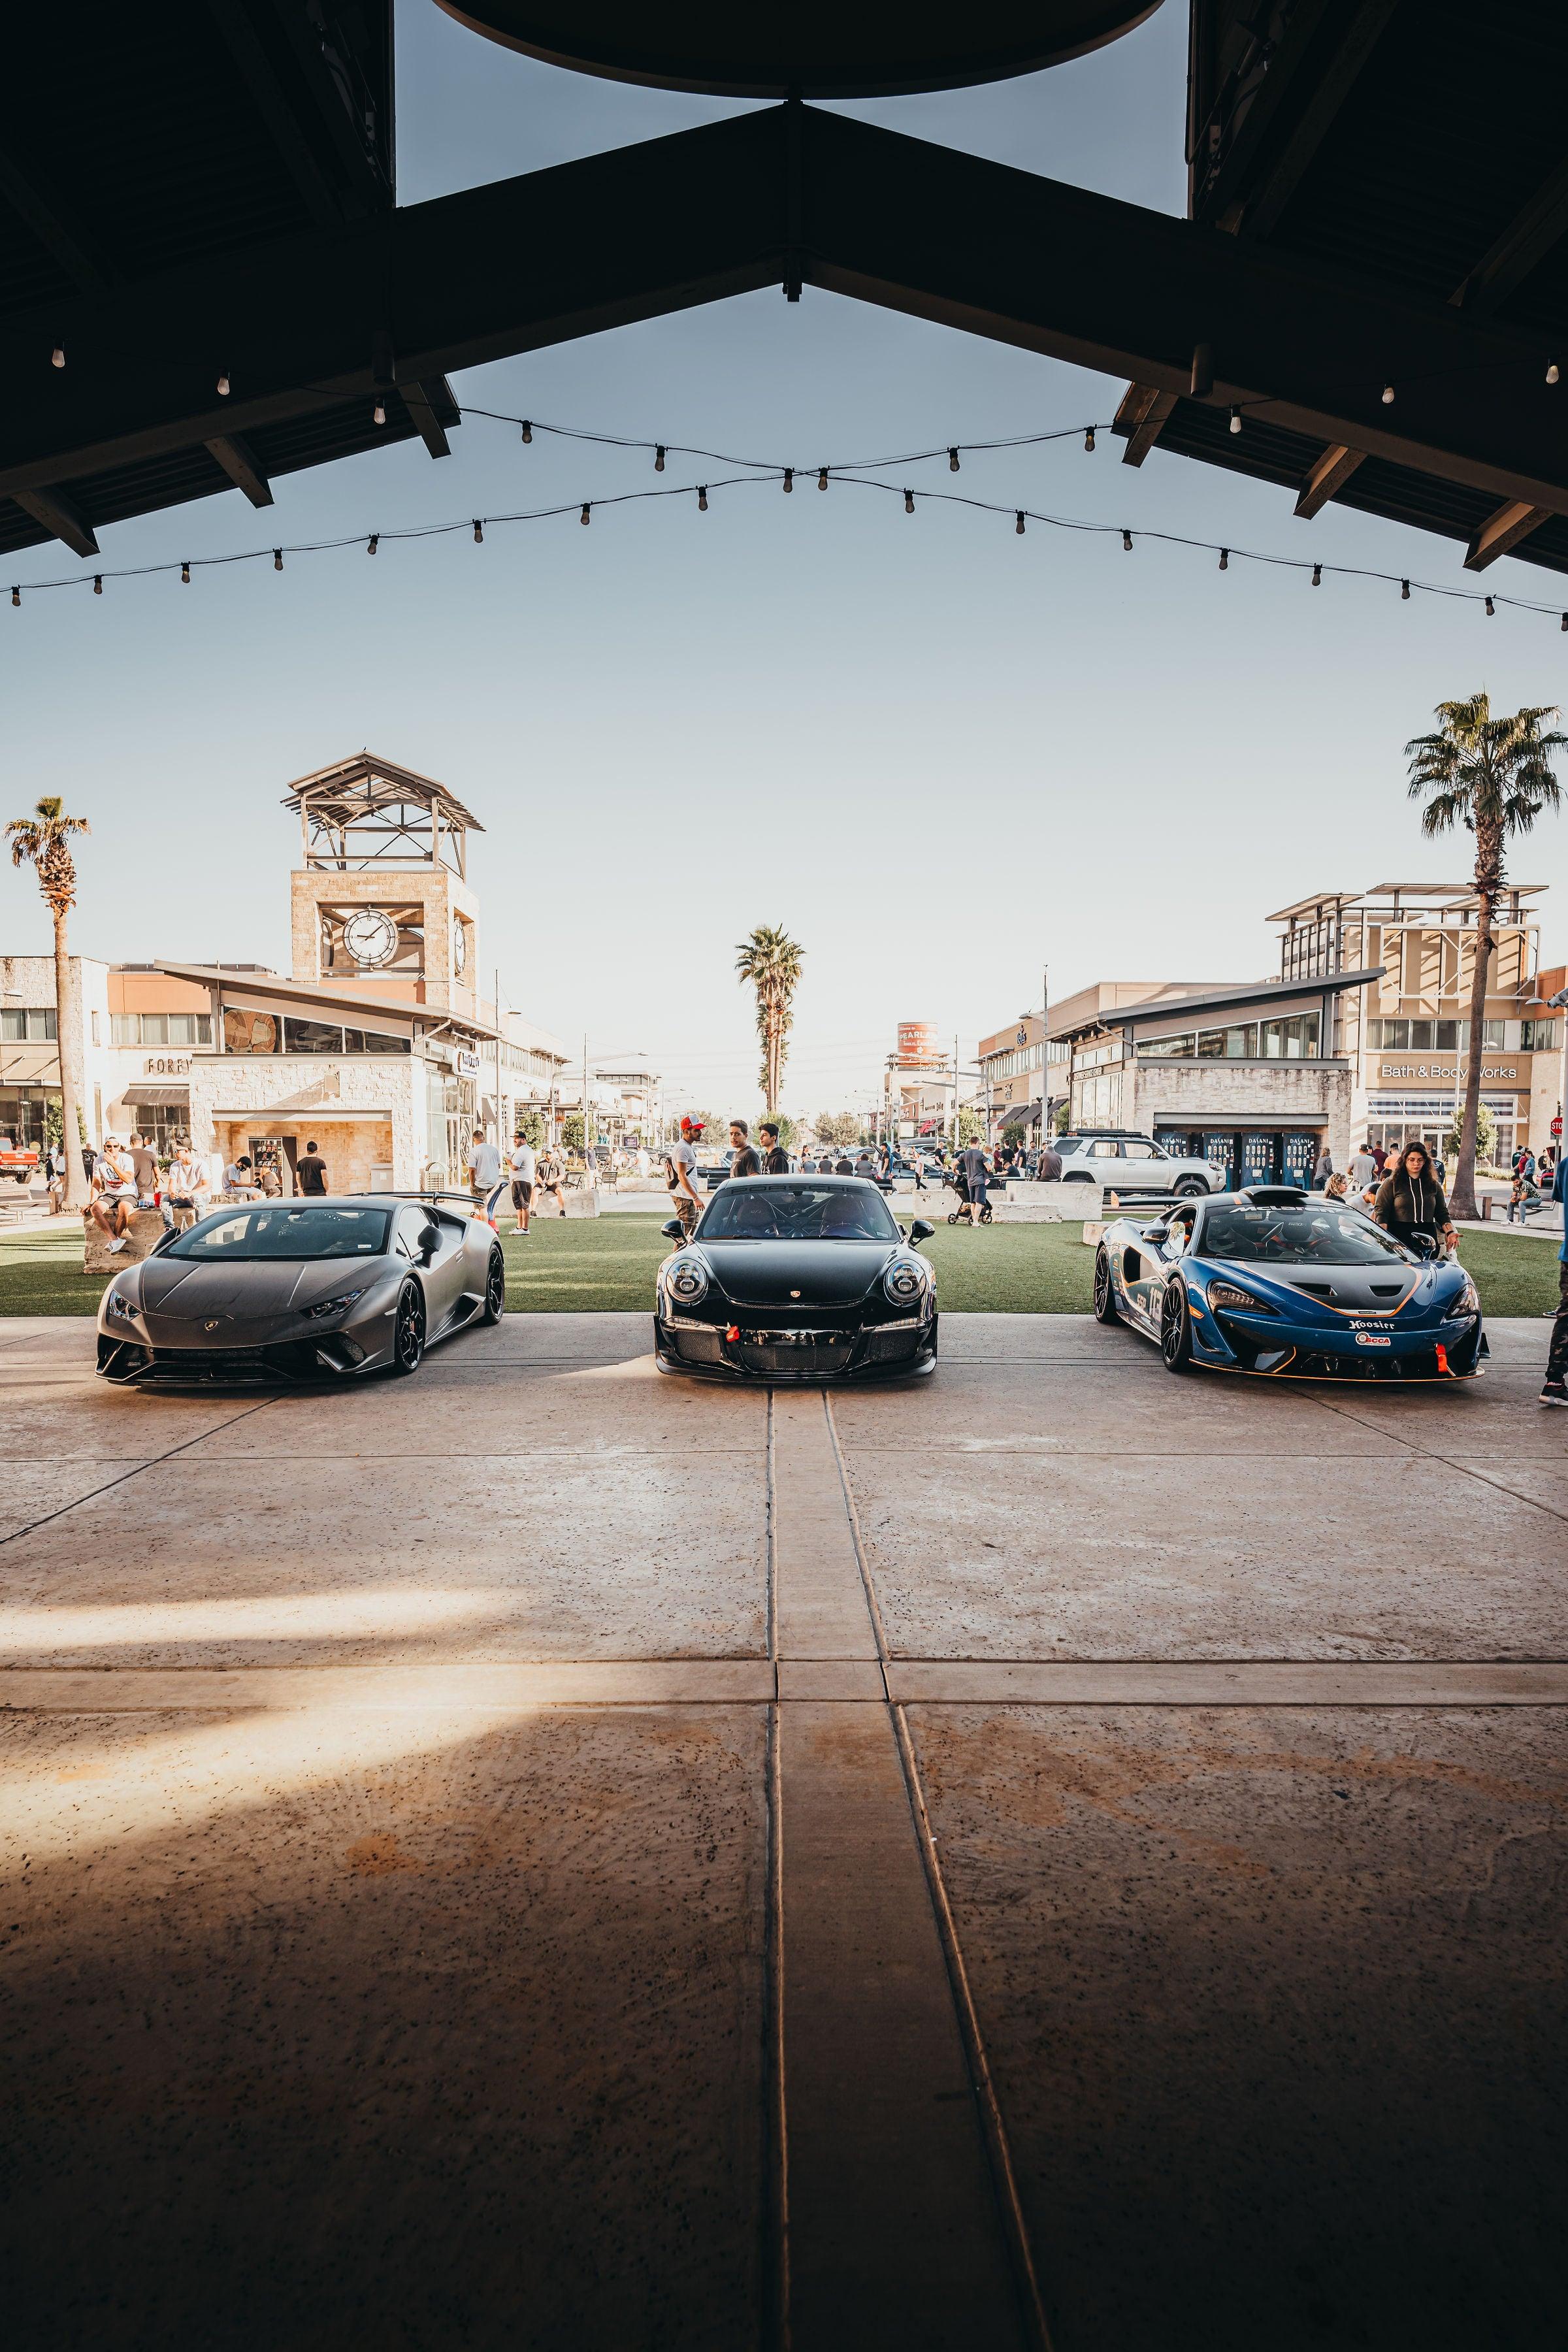 Houston Car Shows | Limitless | September 2021 - The Car Culture